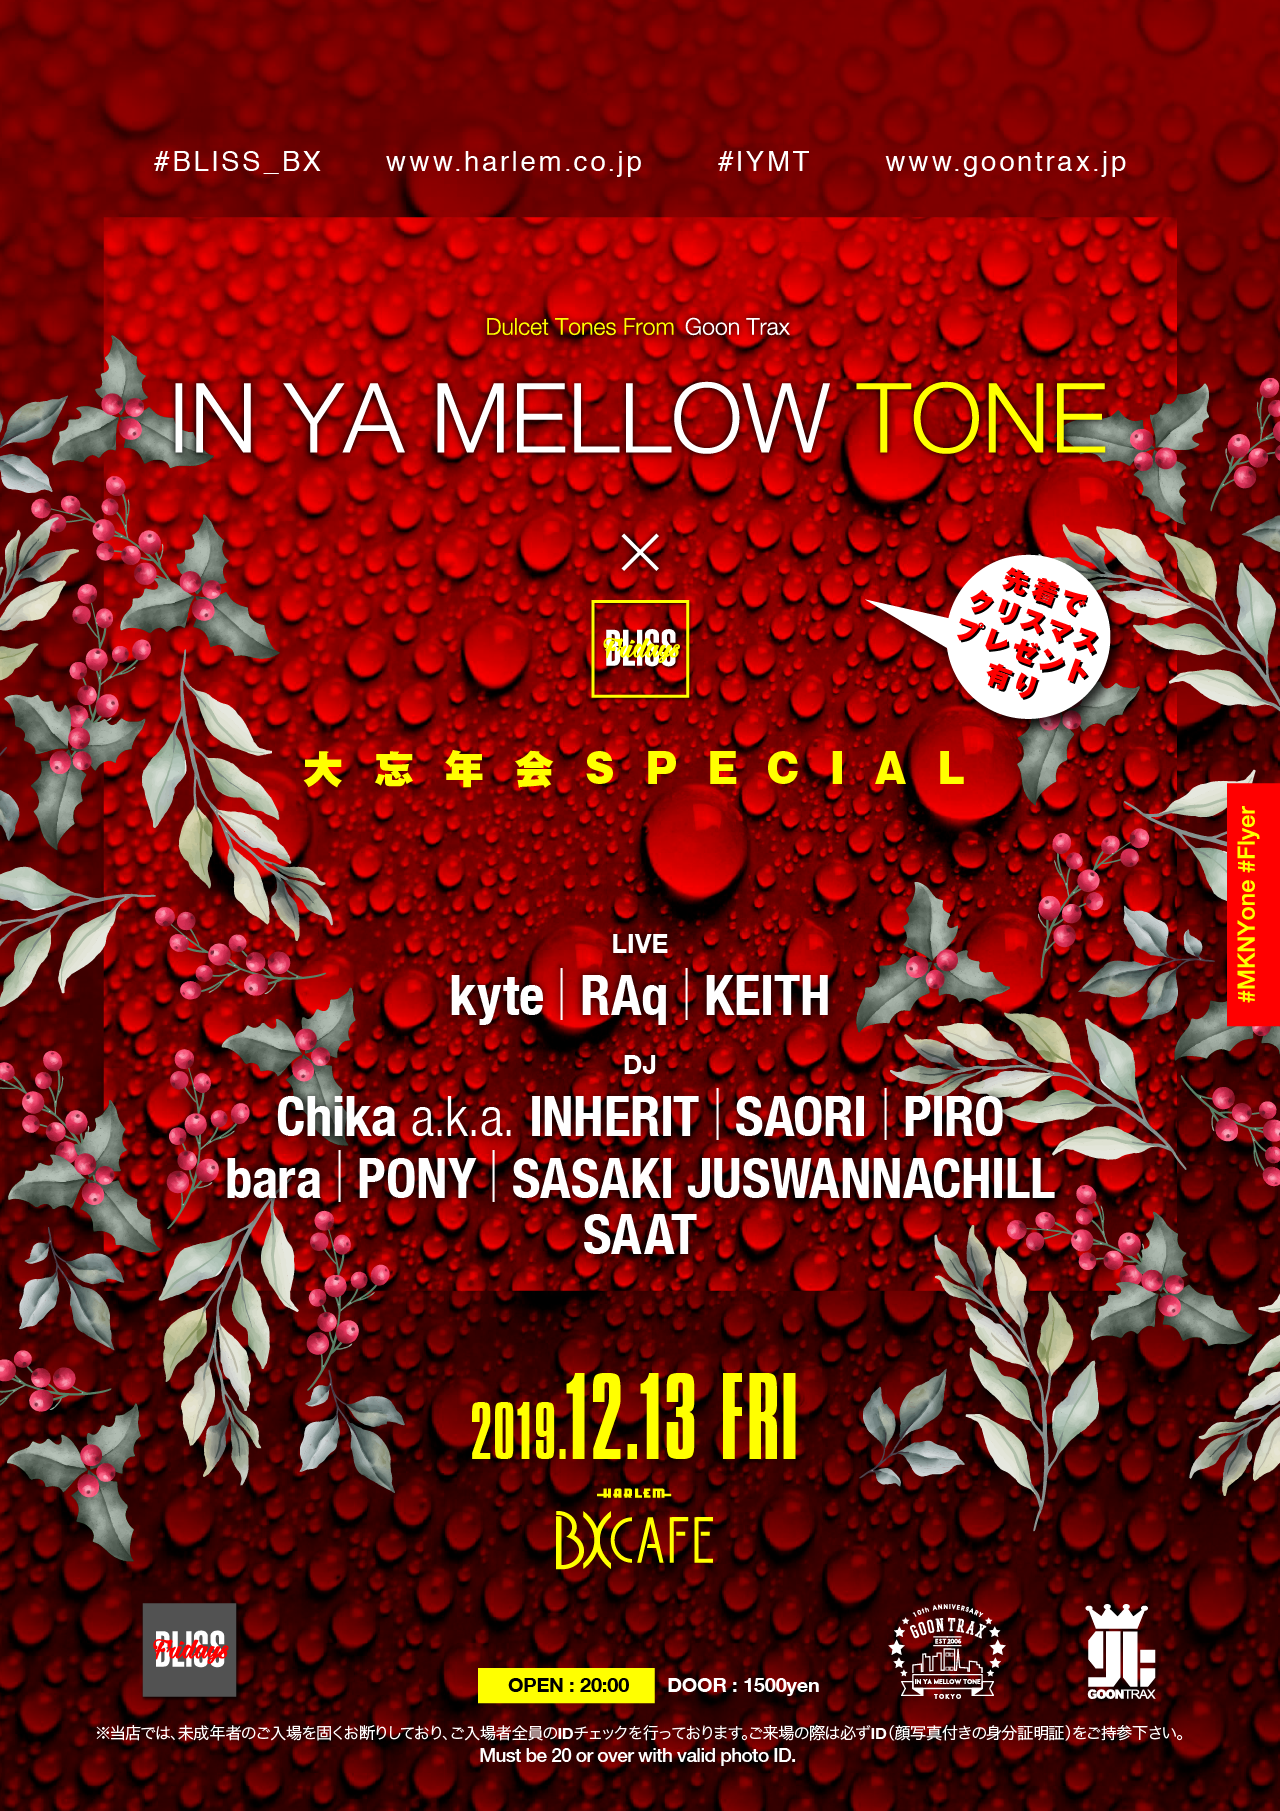 AFTER WORK EACH & EVERY FRIDAYS BLISS FRIDAYS × IN YA MELLOW TONE 大忘年会SPECIAL